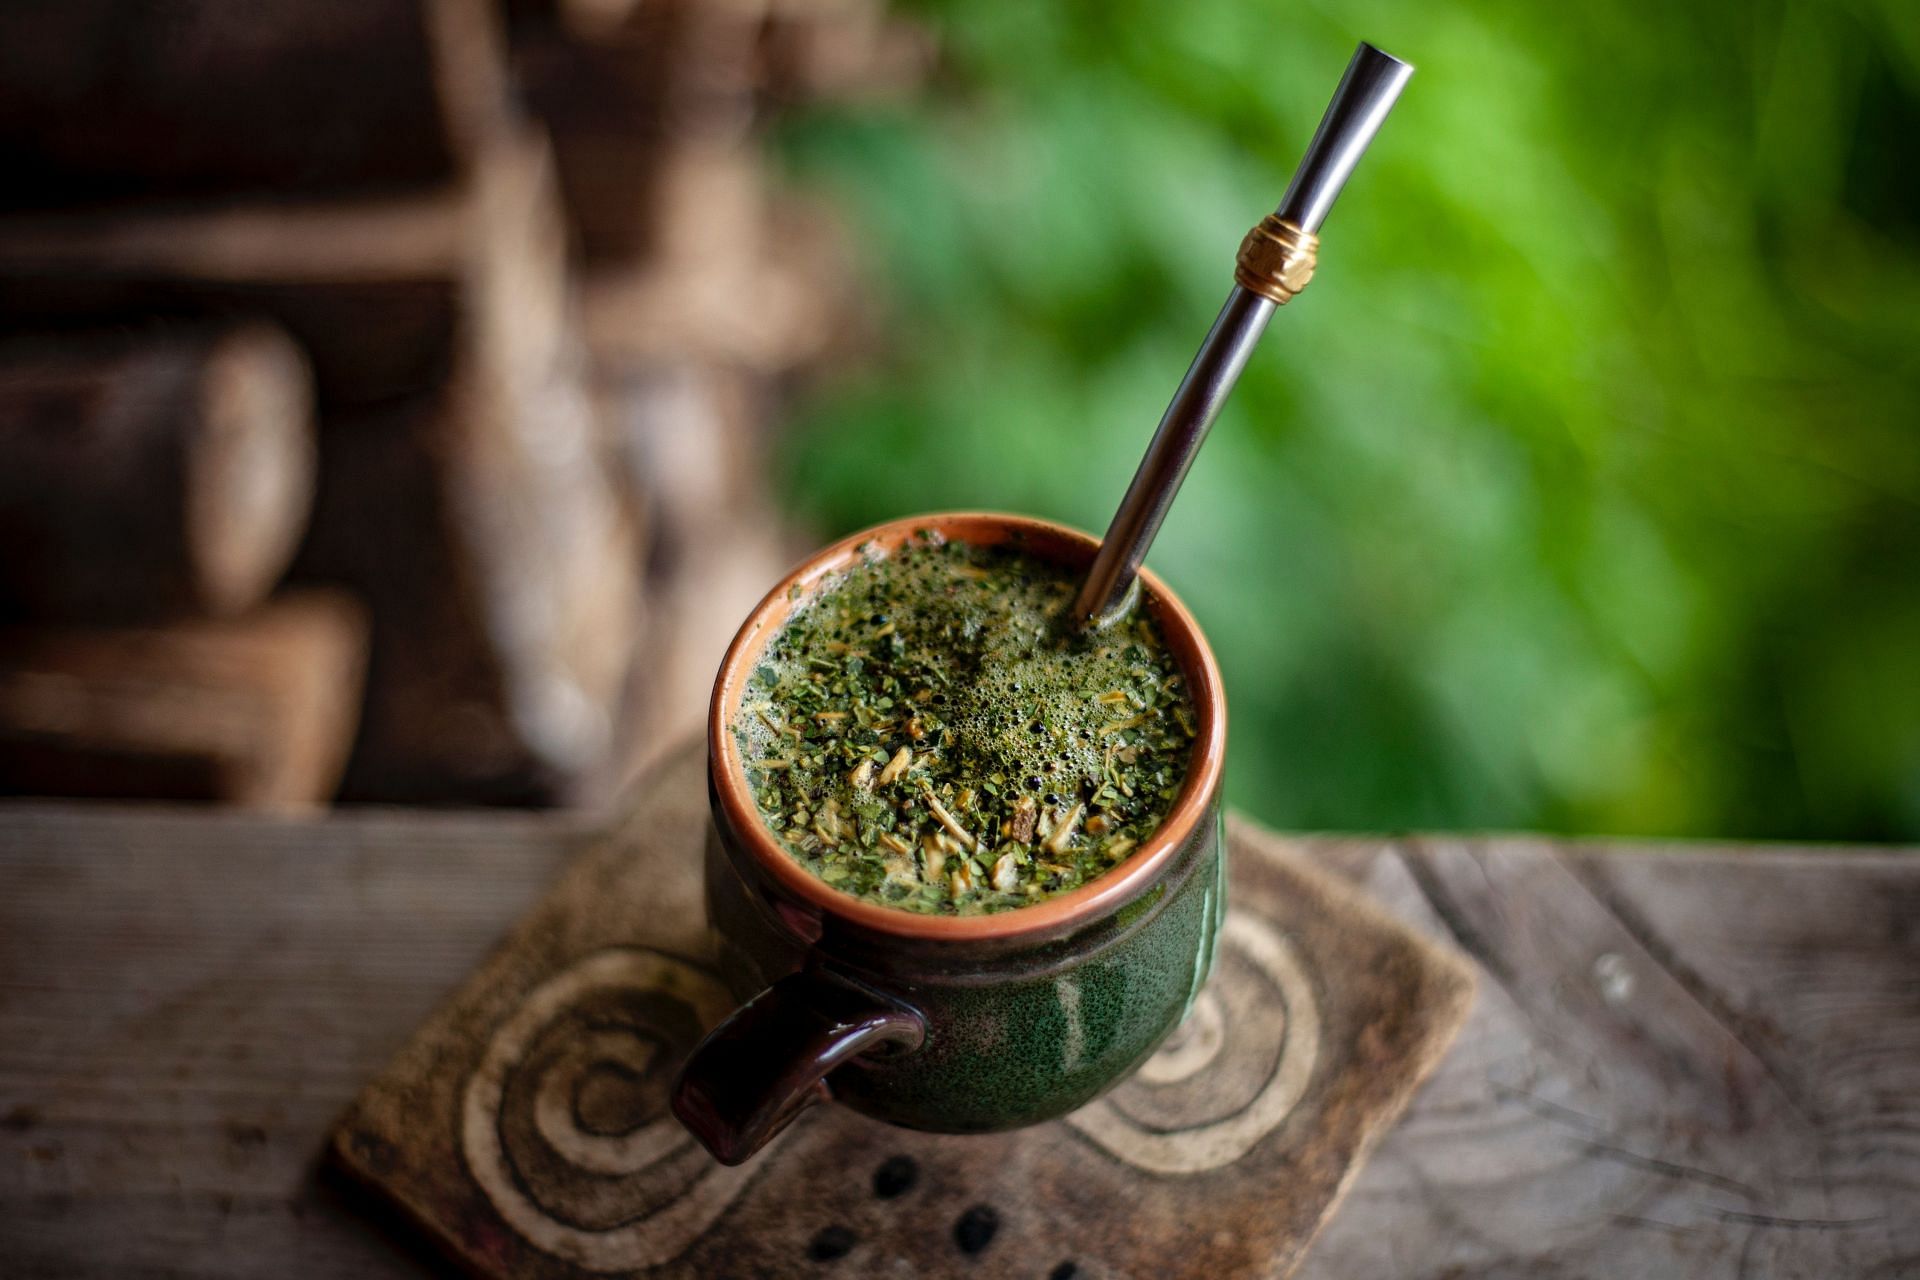 Benefits of yerba mate tea you probably didn’t know about